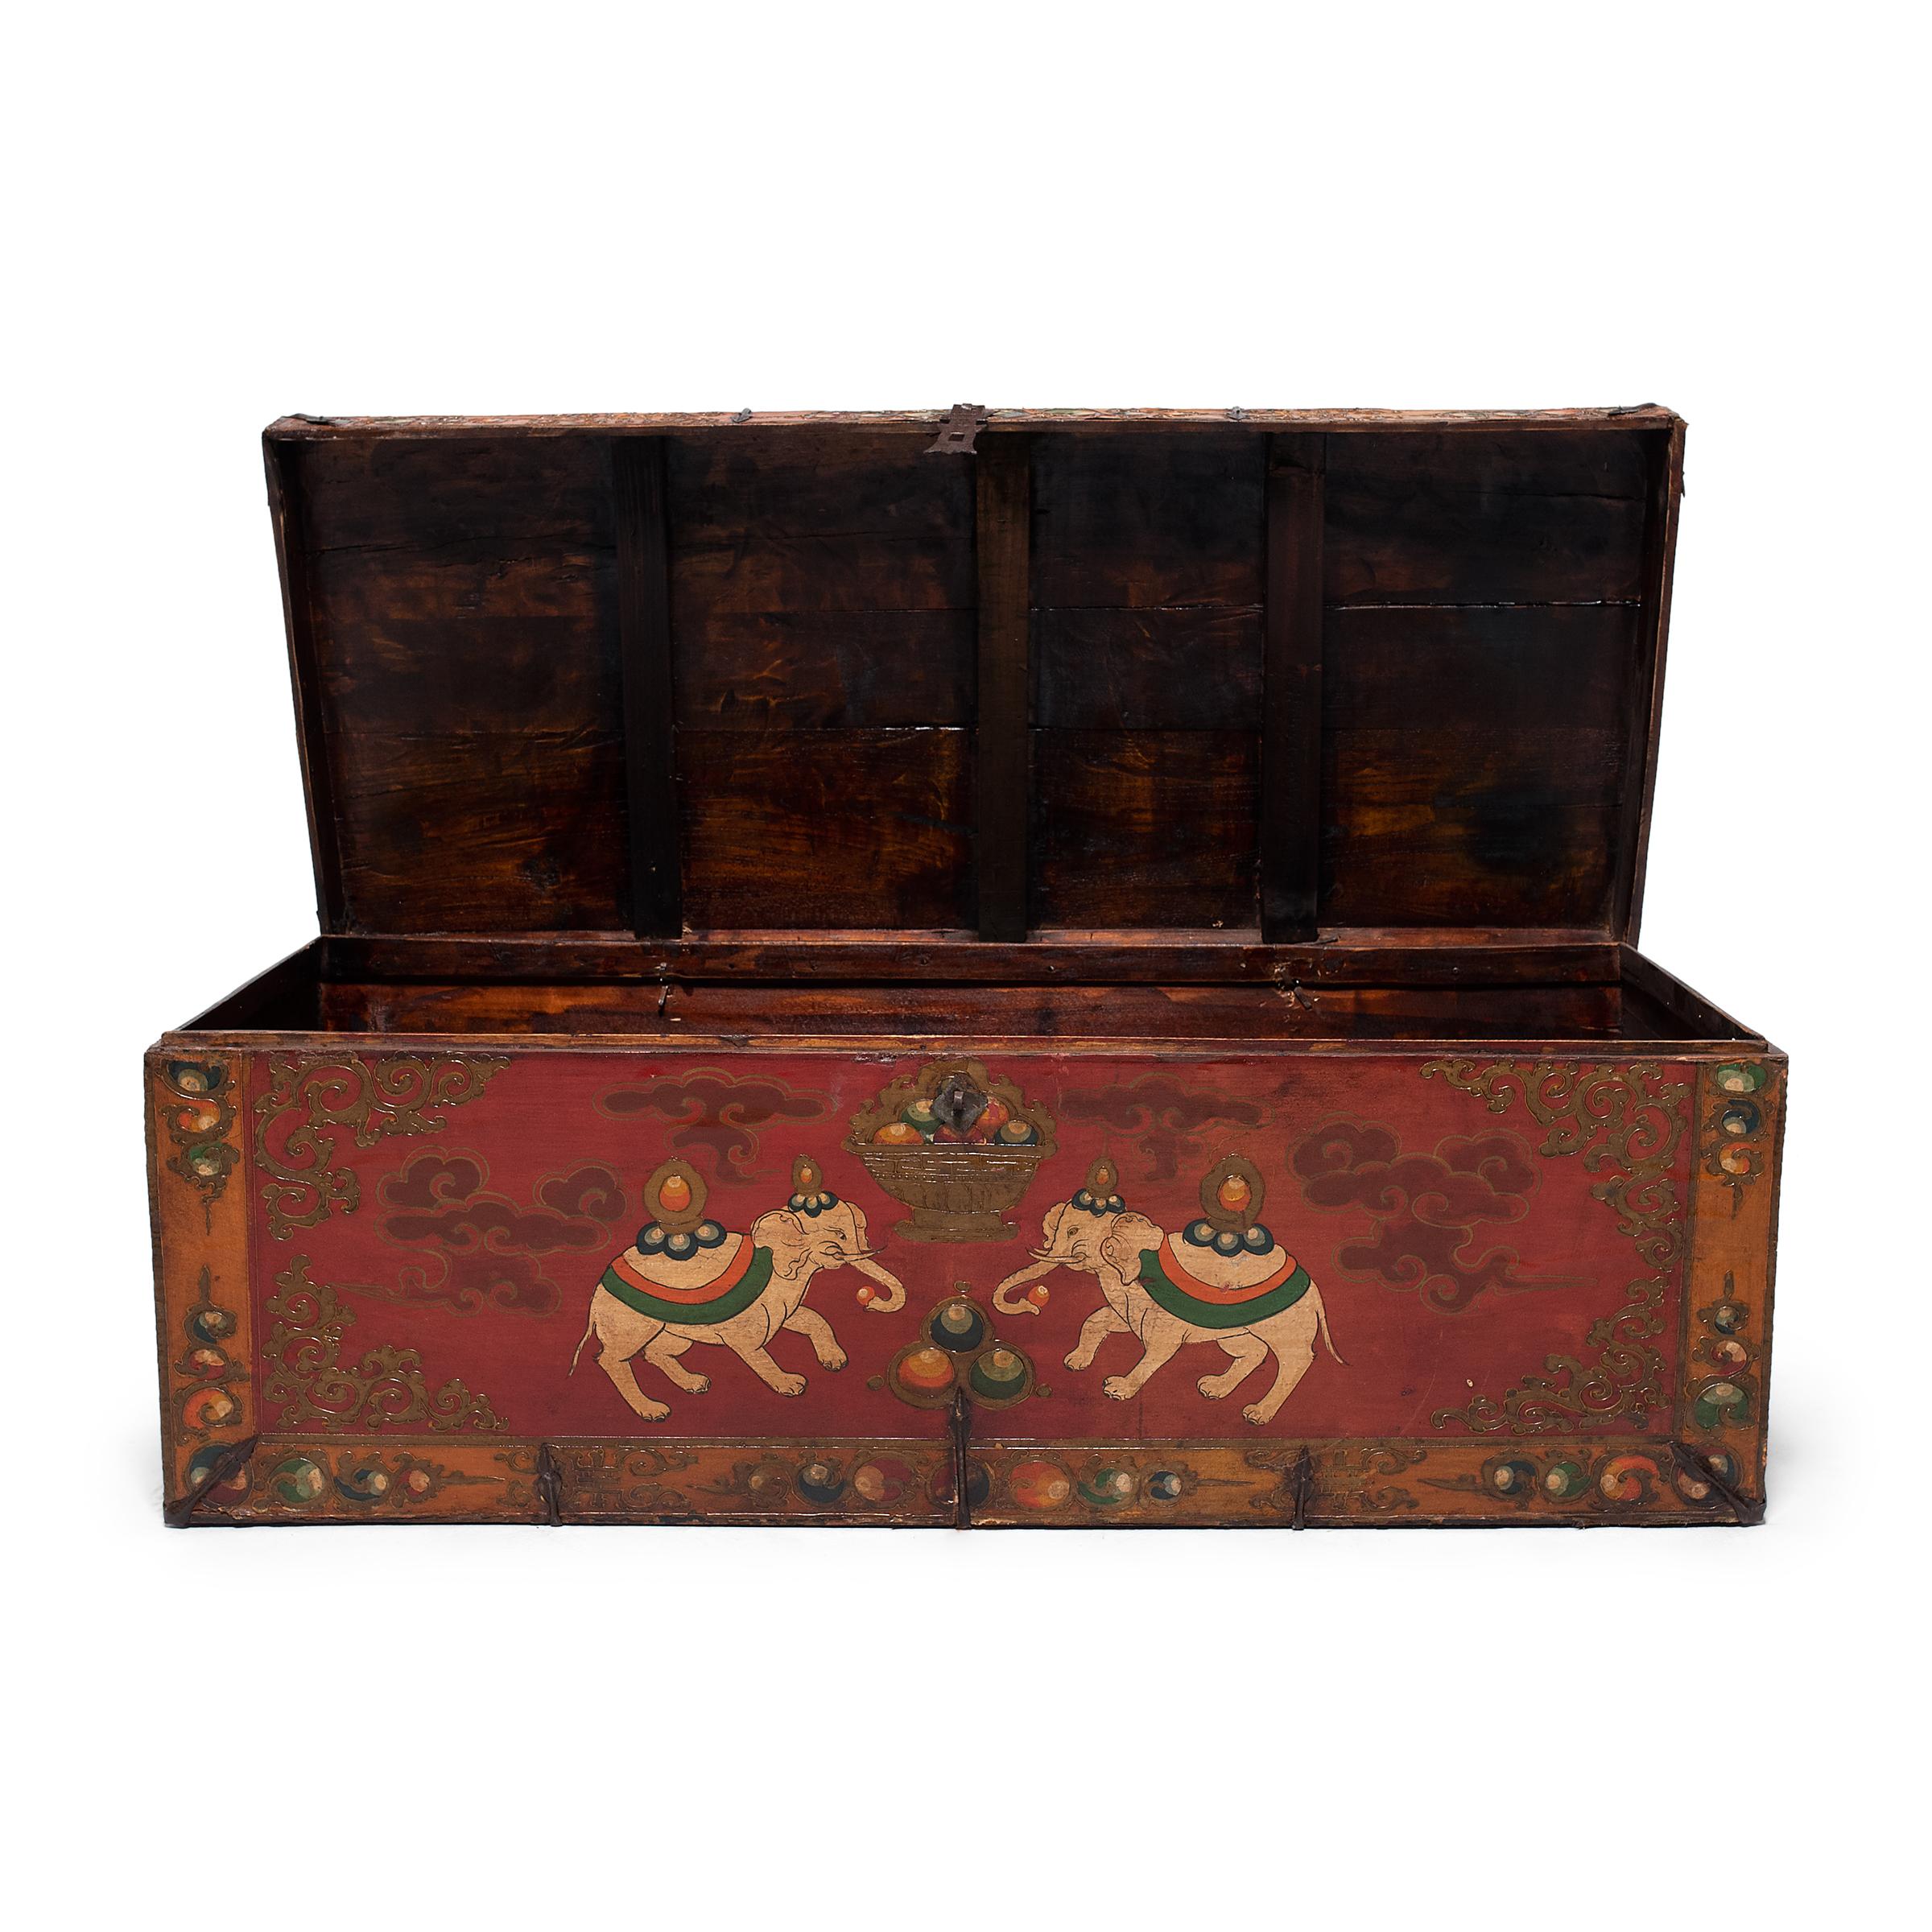 20th Century Northern Chinese Painted Elephant Trunk, c. 1900